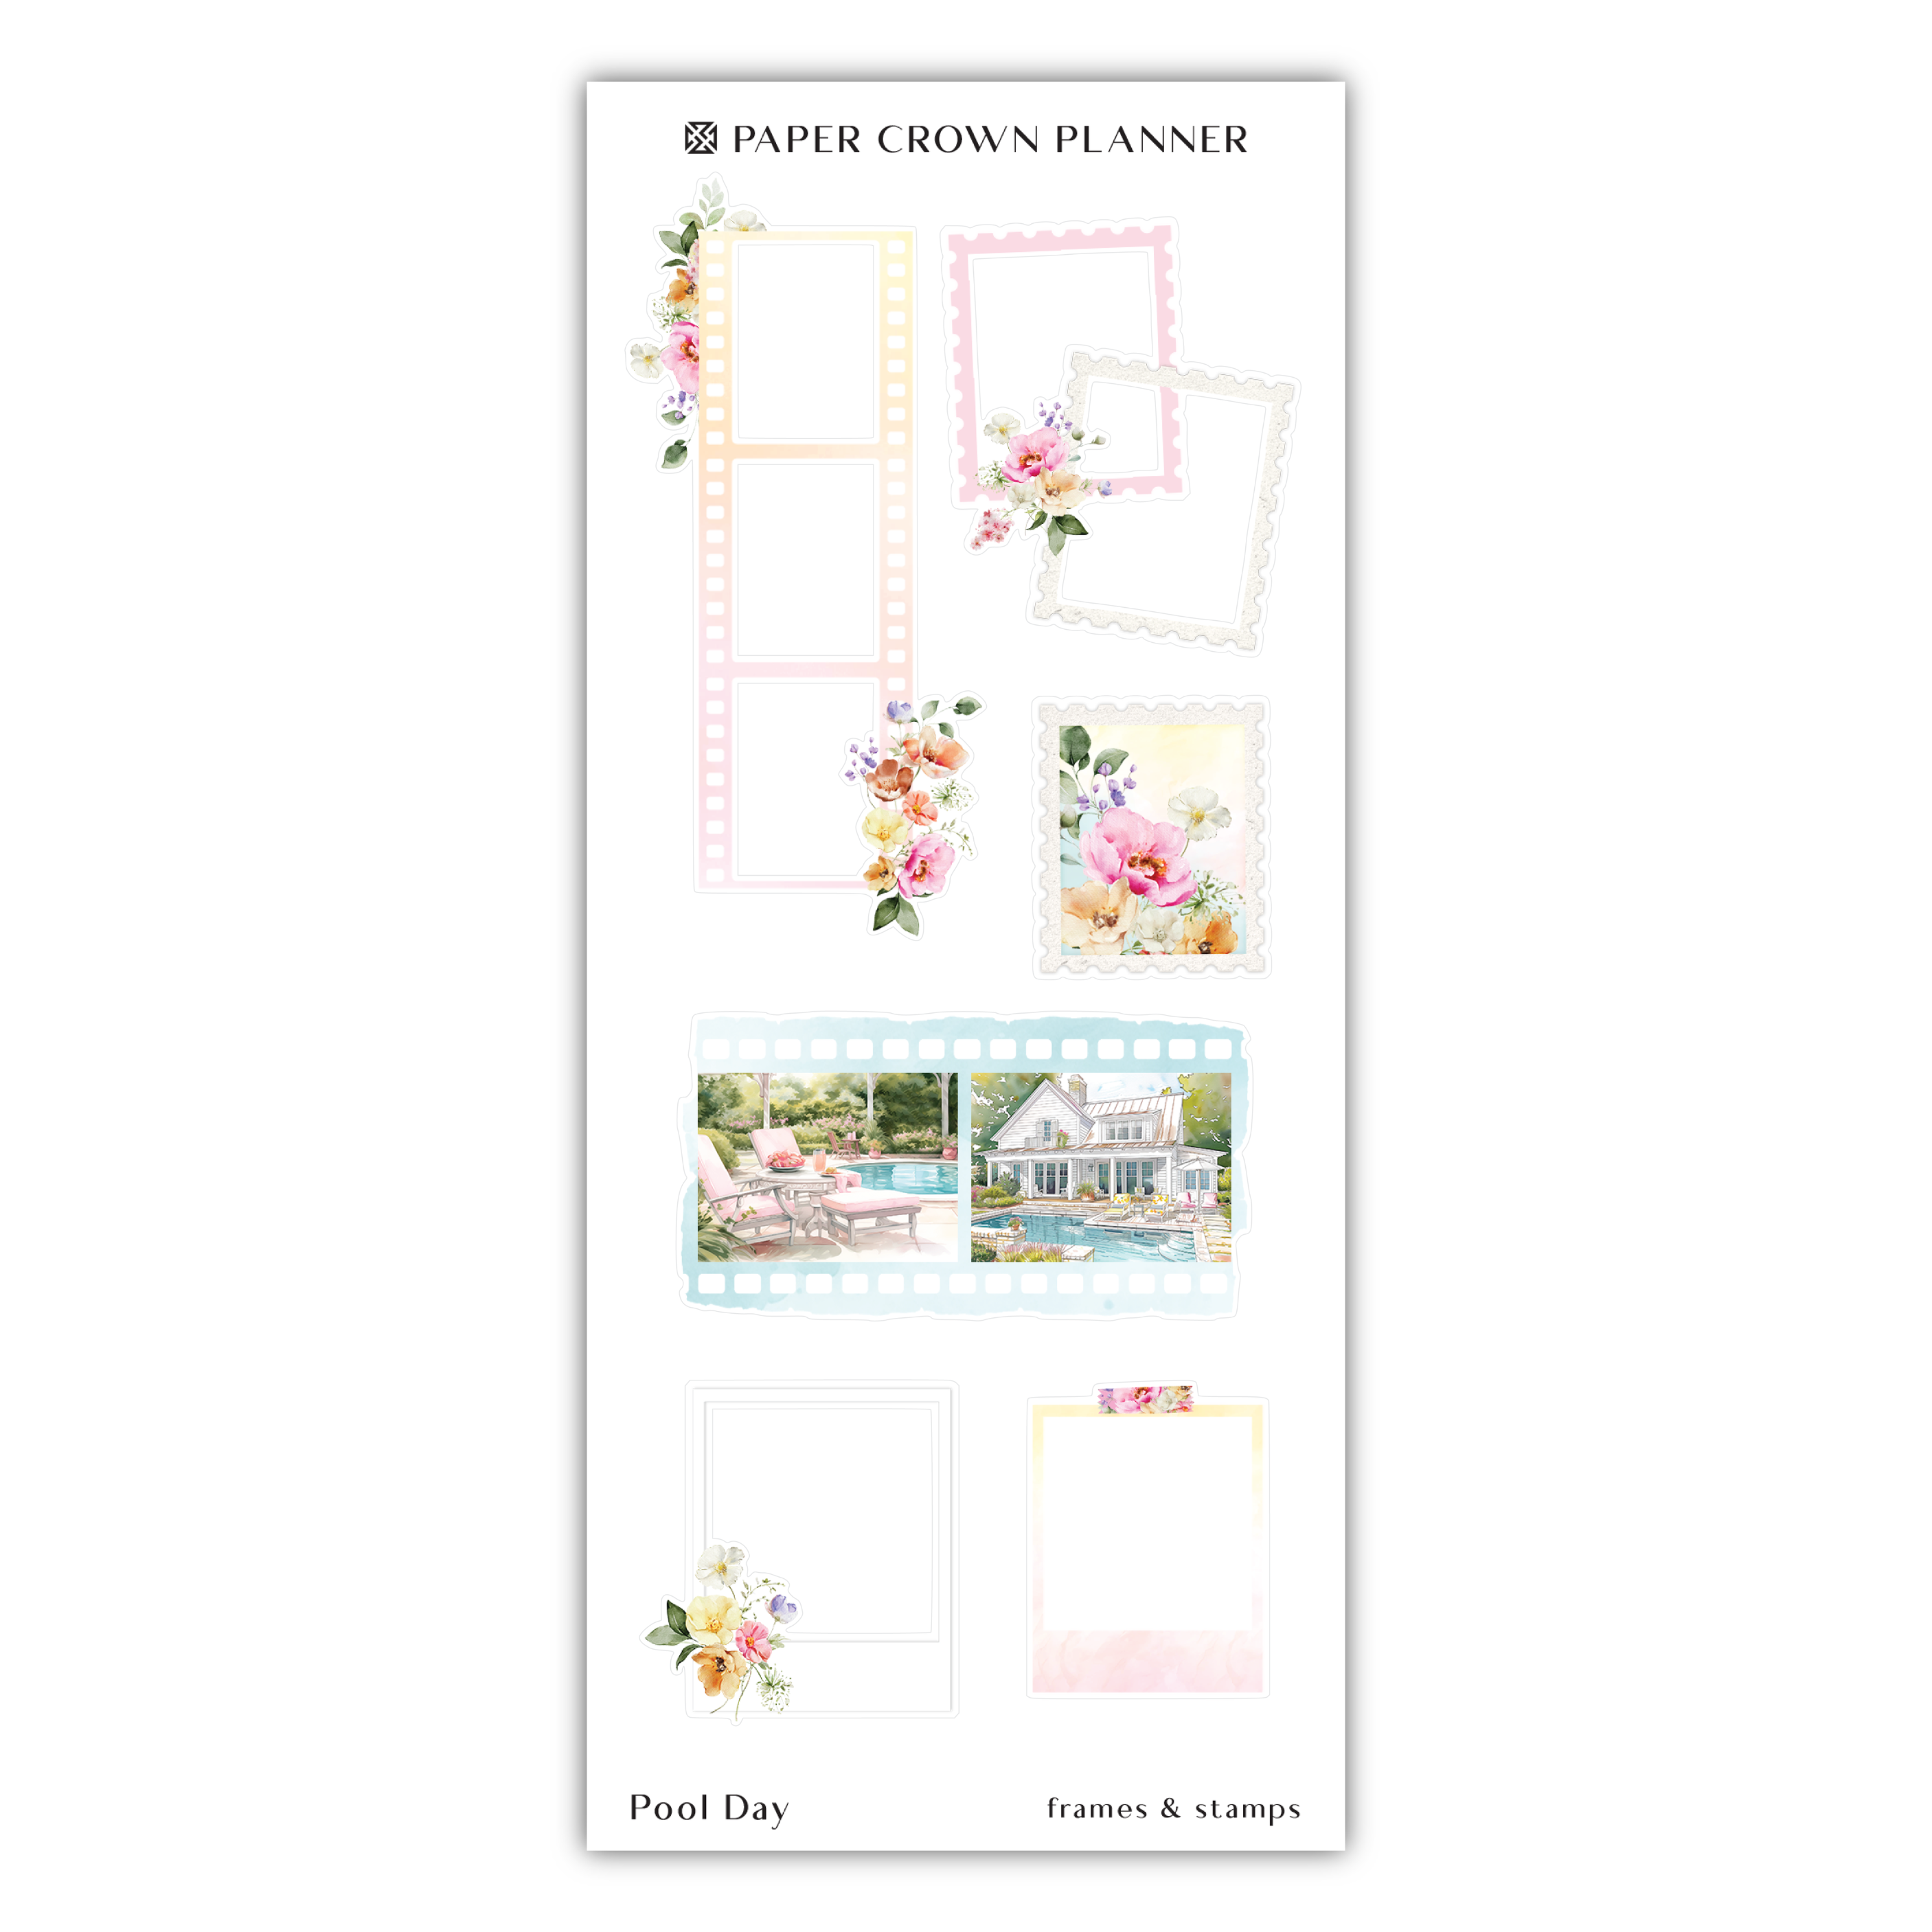 a paper growth planner with flowers and pictures on it